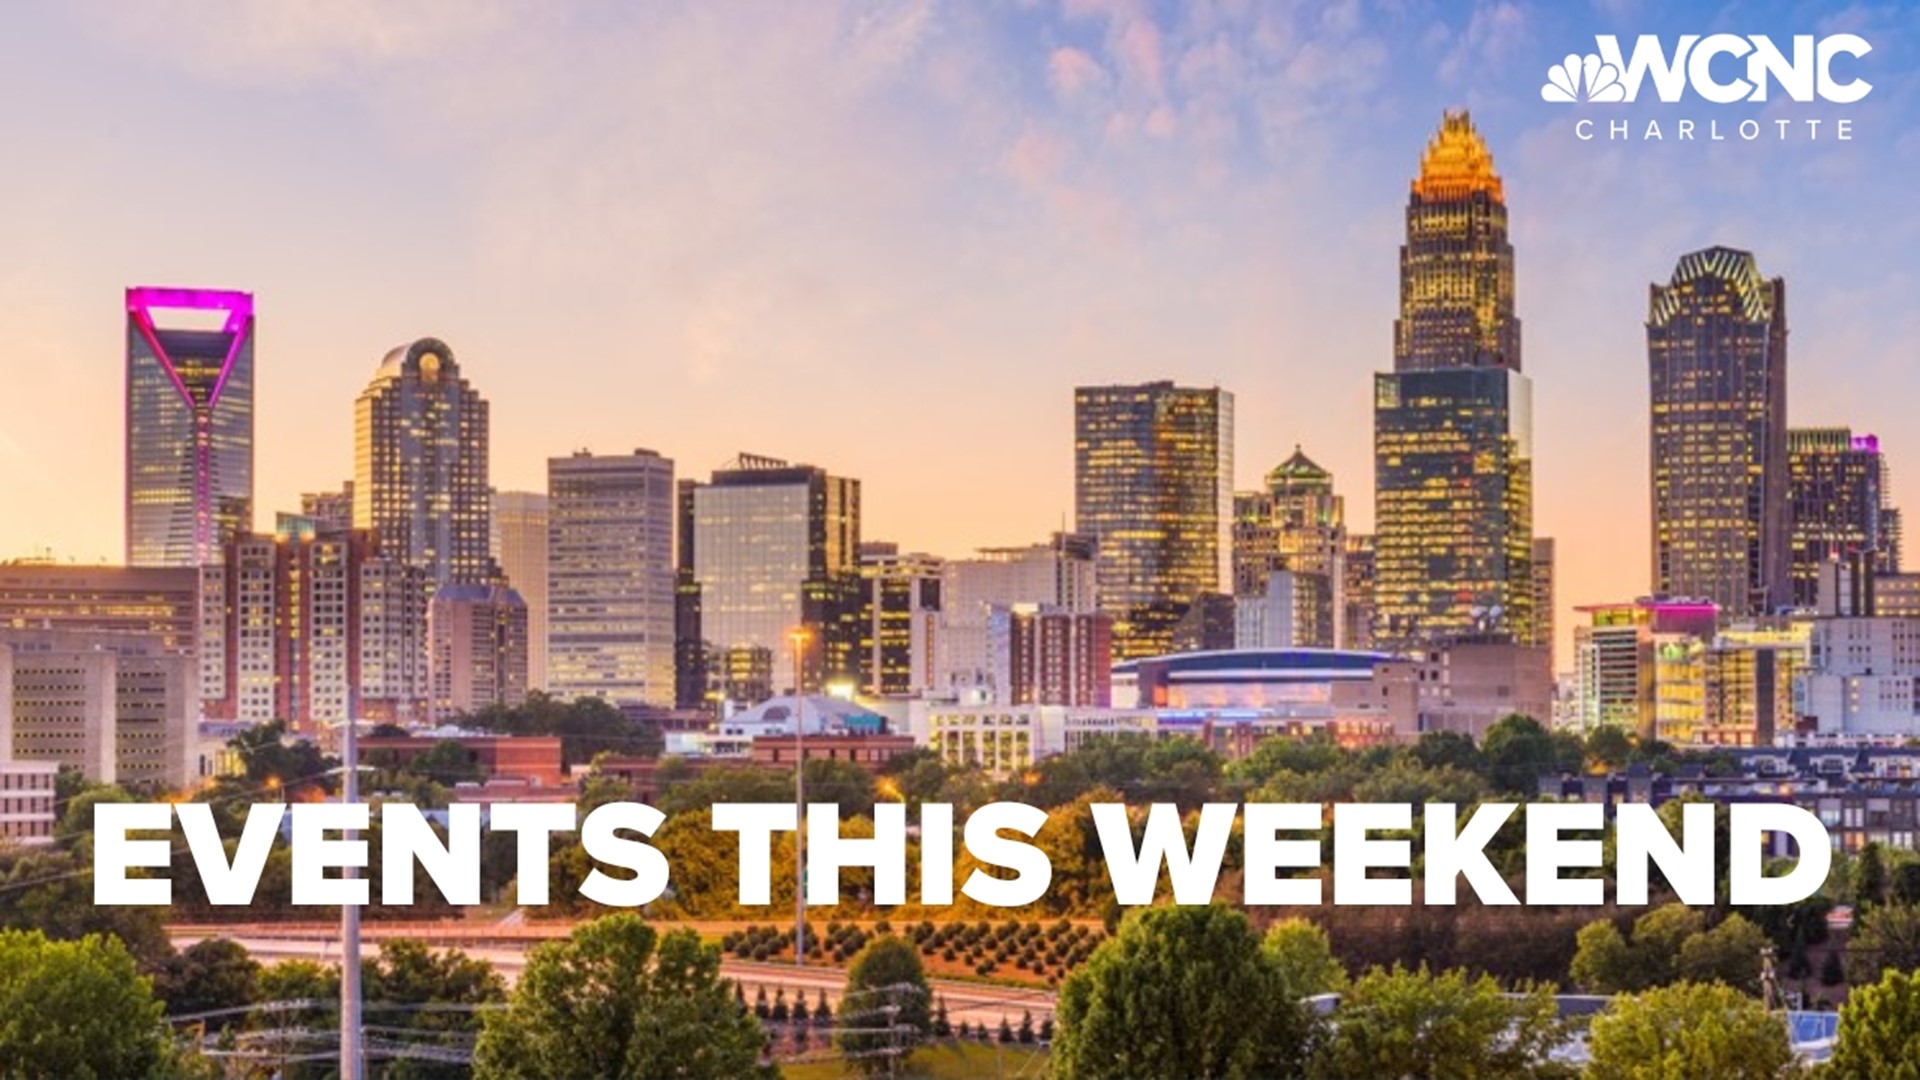 From live music to figure drawing classes, there are plenty of opportunities to explore the Charlotte-area this weekend.